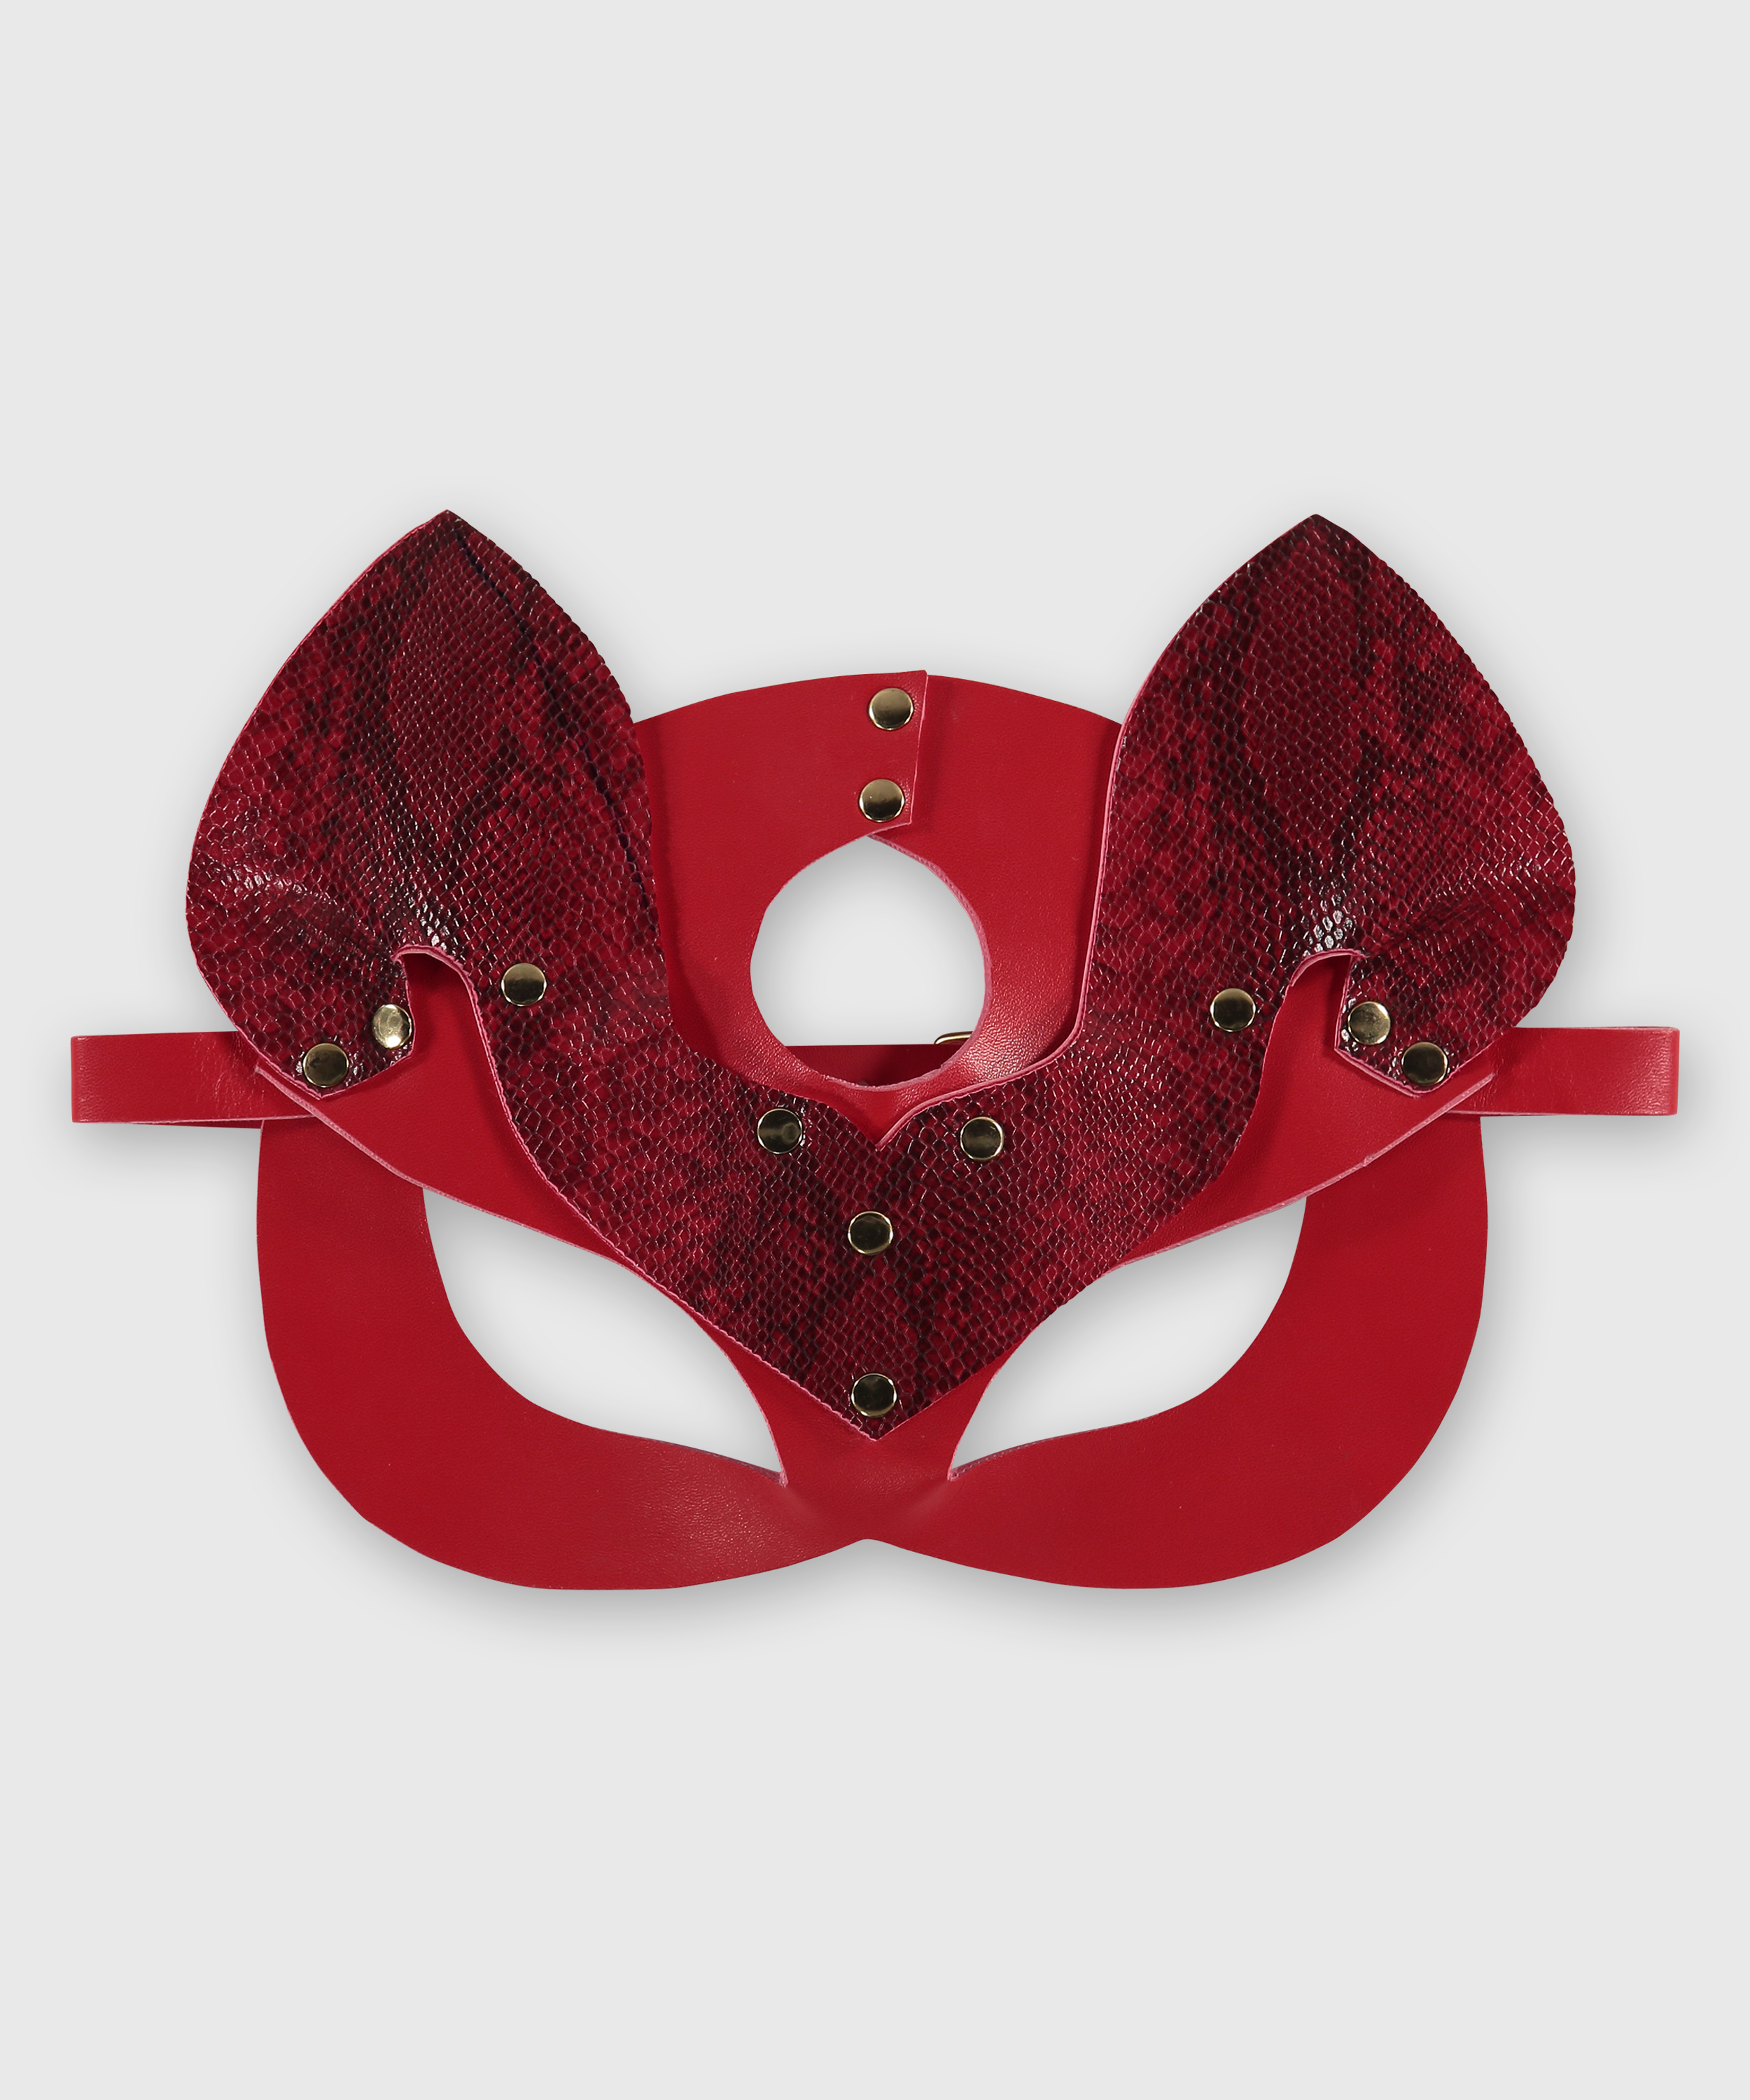 Private Kitten Mask, Red, main